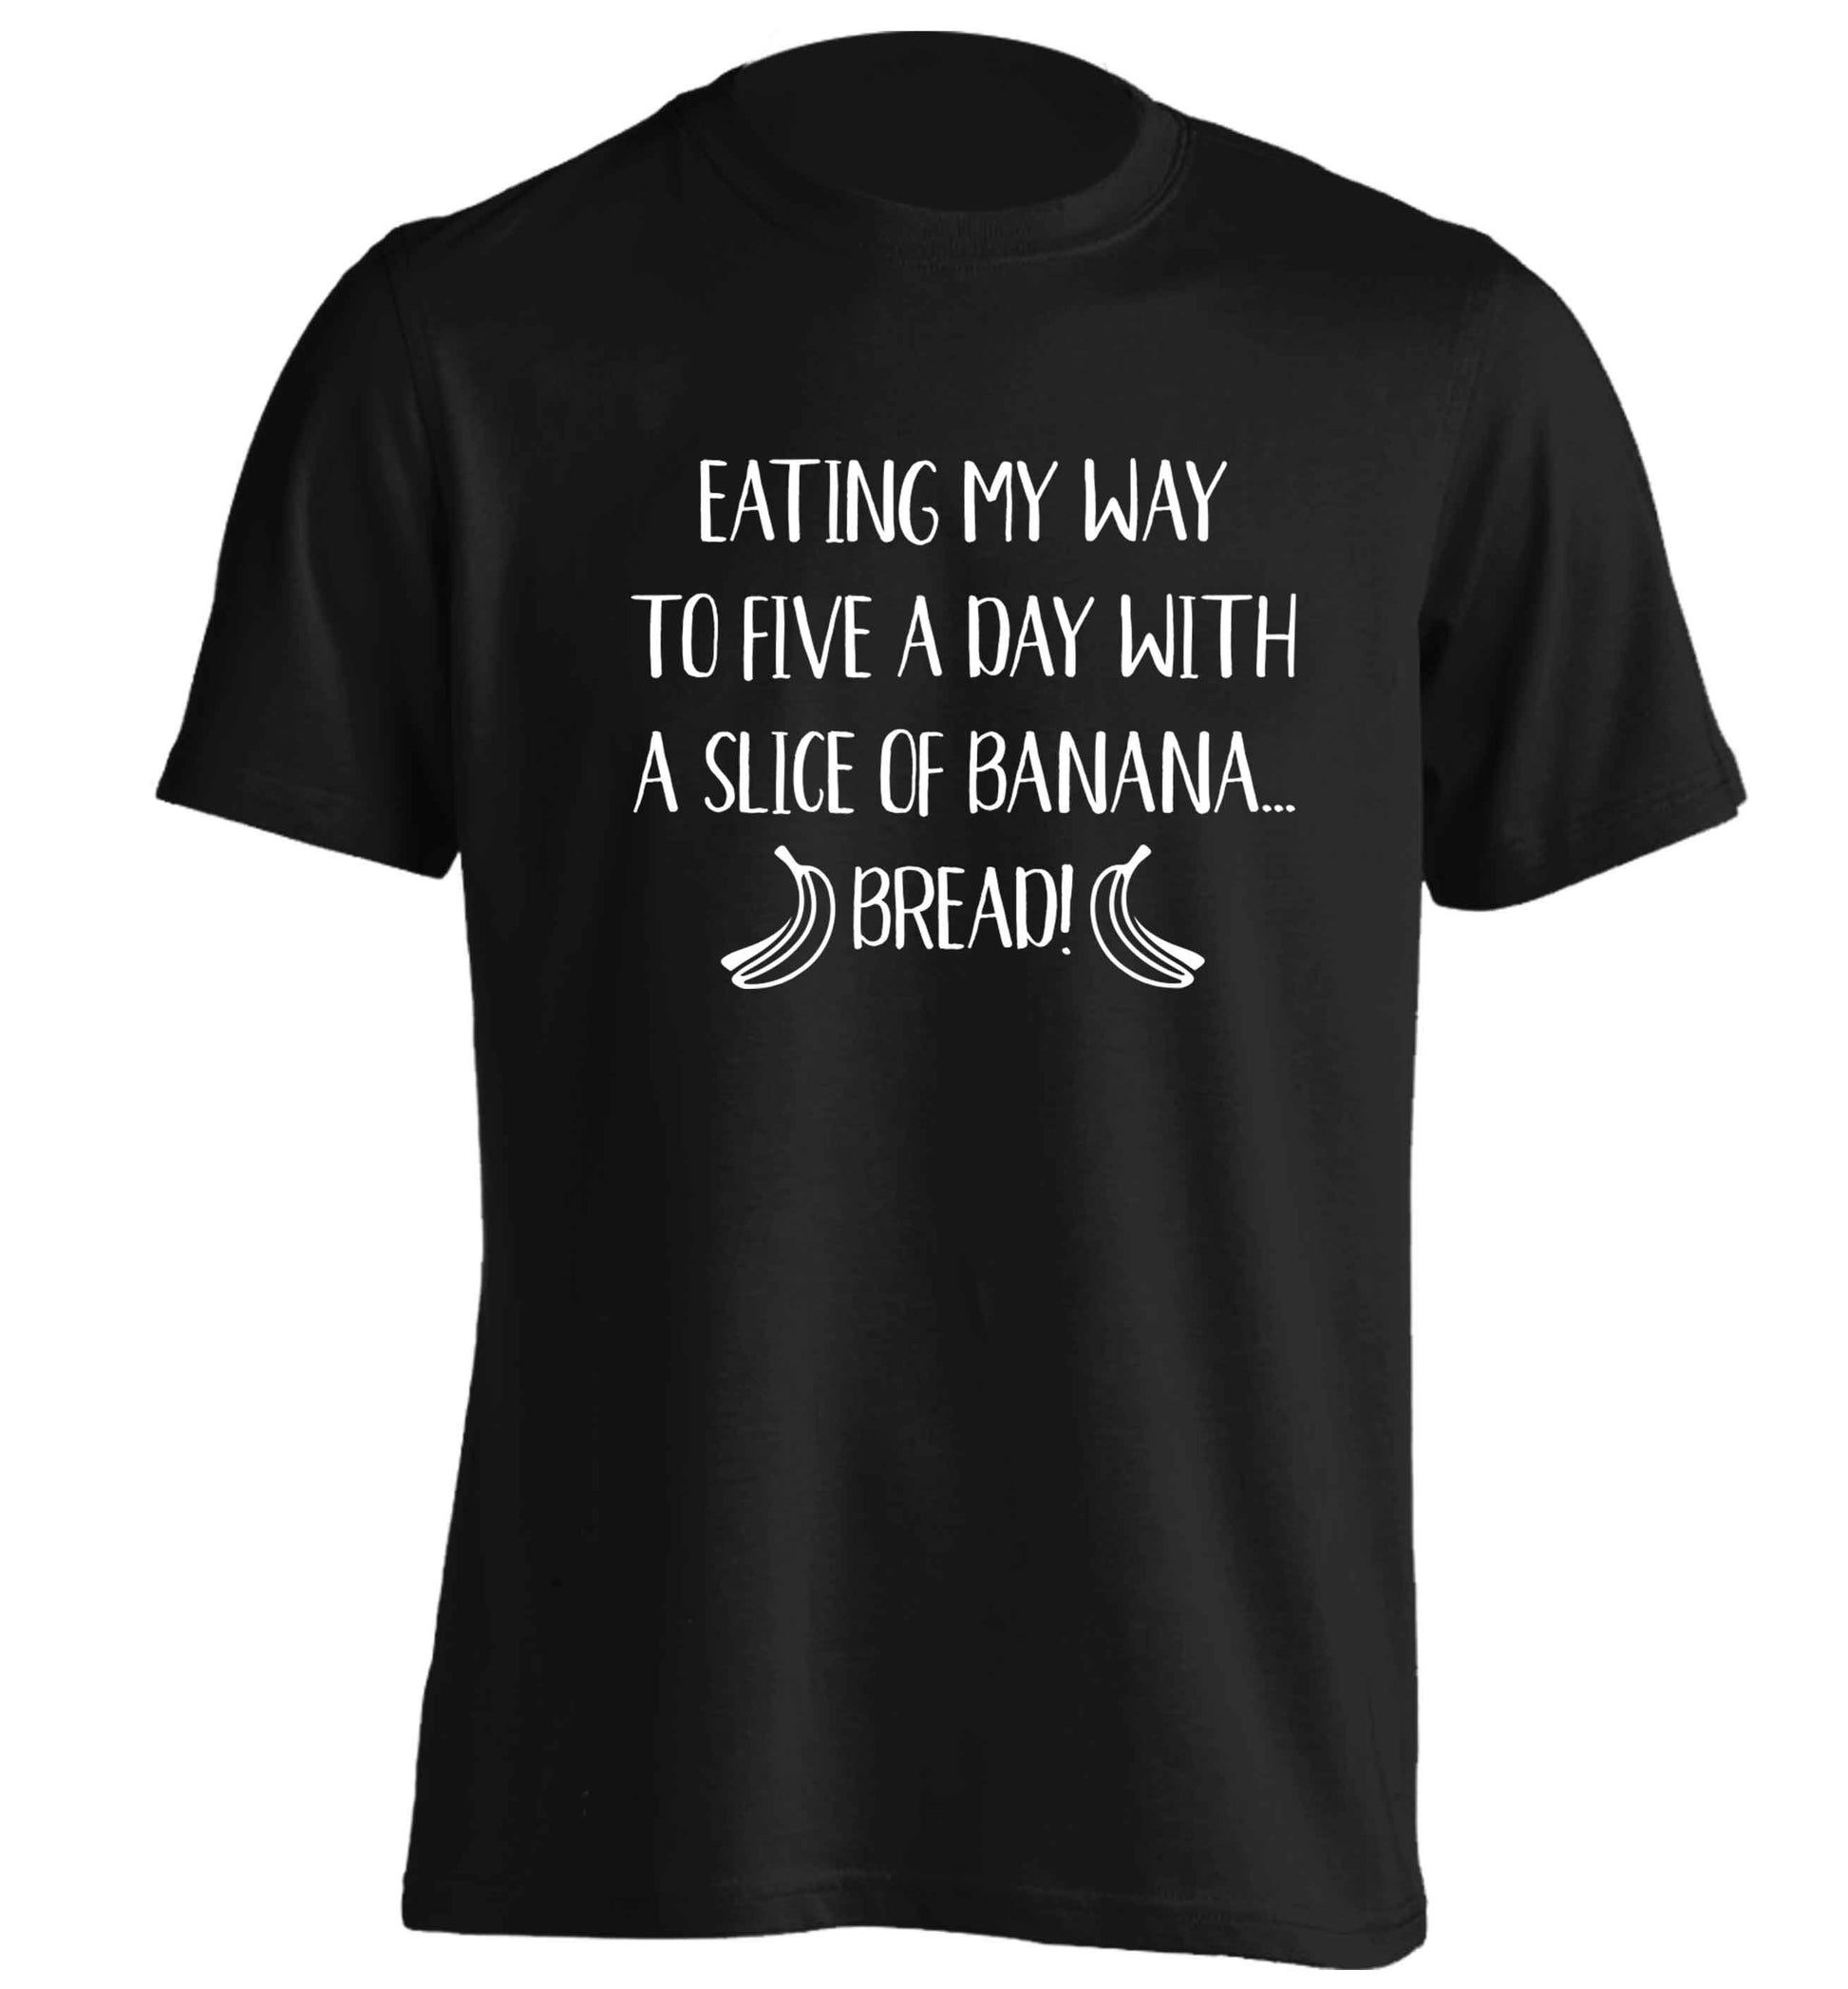 Eating my way to five a day with a slice of banana bread adults unisex black Tshirt 2XL